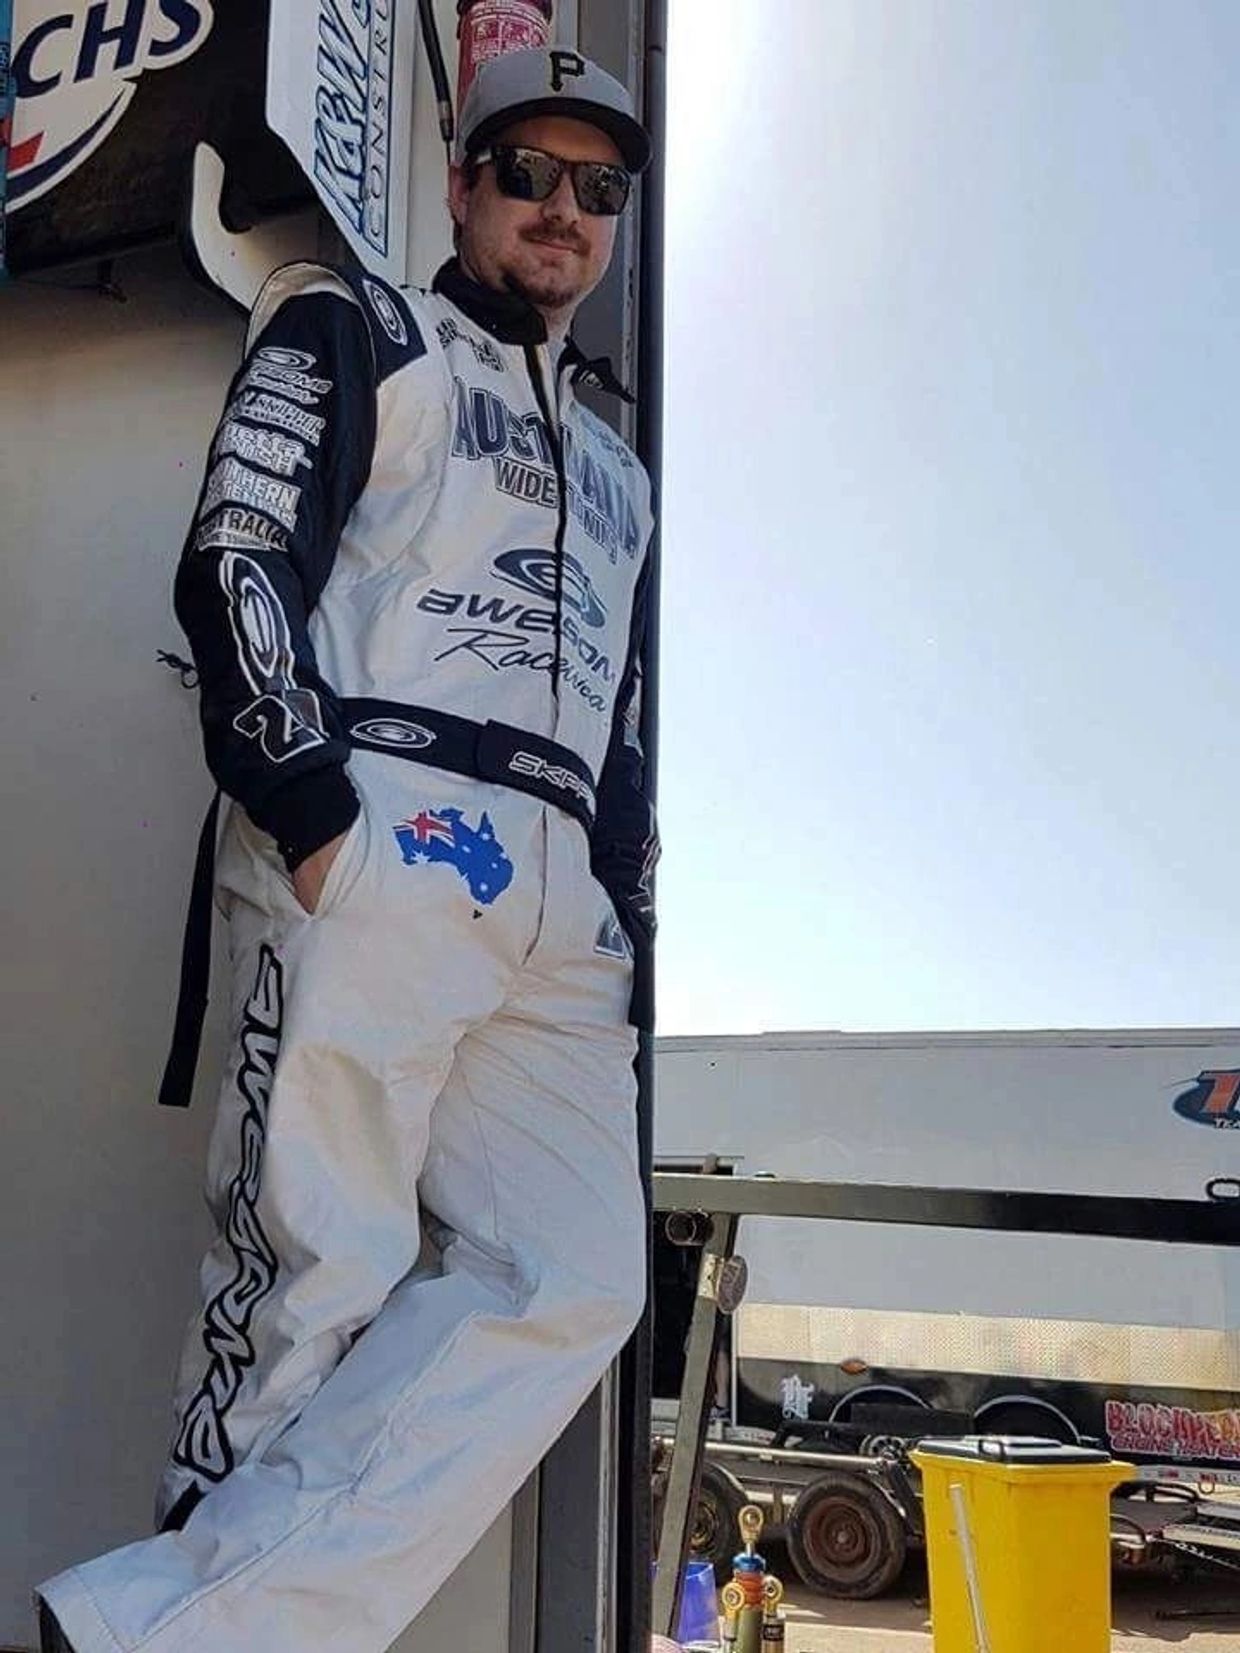 Awesome Racewear Premium Nomex Race Suits. Fully Loaded with Digital Printed or Embroidered Logos.